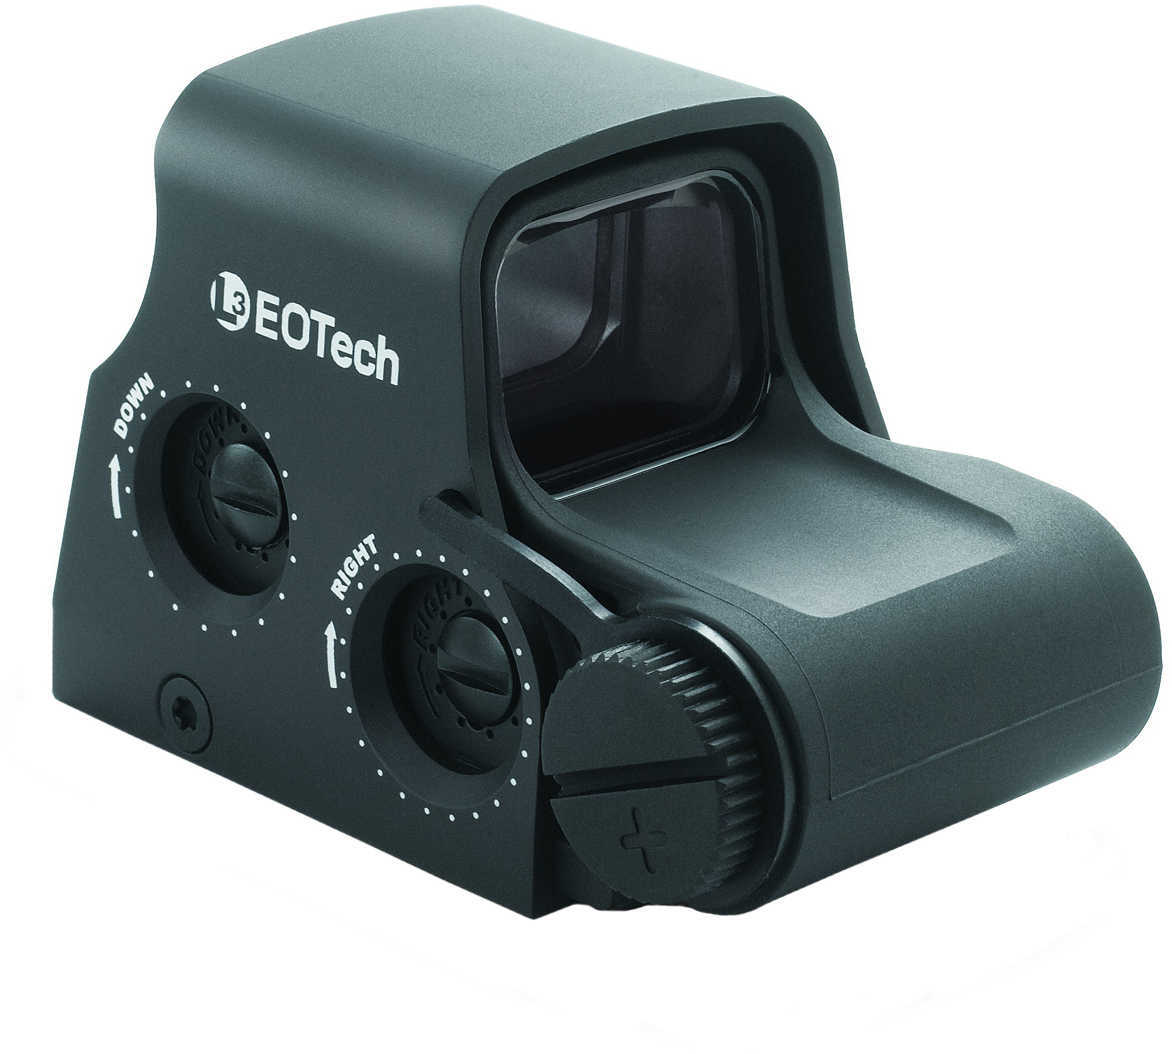 EOTech XPS3 Holographic Sight Red 68MOA Ring with 1 MOA Dot Reticle Rear Button Controls Night Vision Compatible Black F